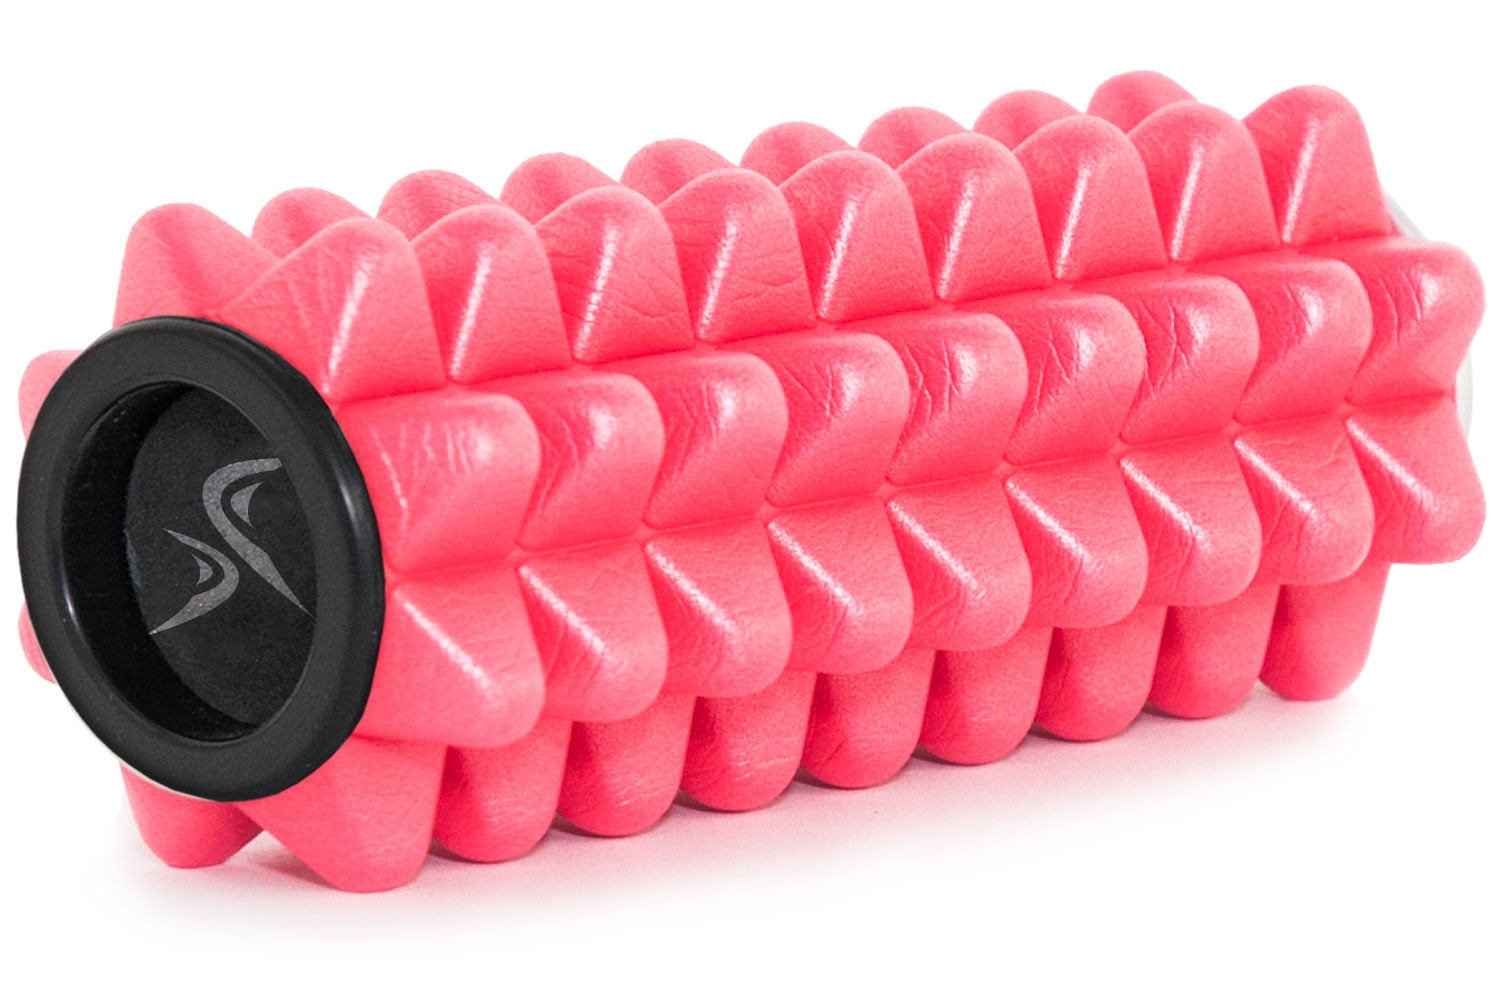 Prosourcefit Mini Spike Massage Roller 6x 3 For Deep Tissue Massage And Muscle Therapy